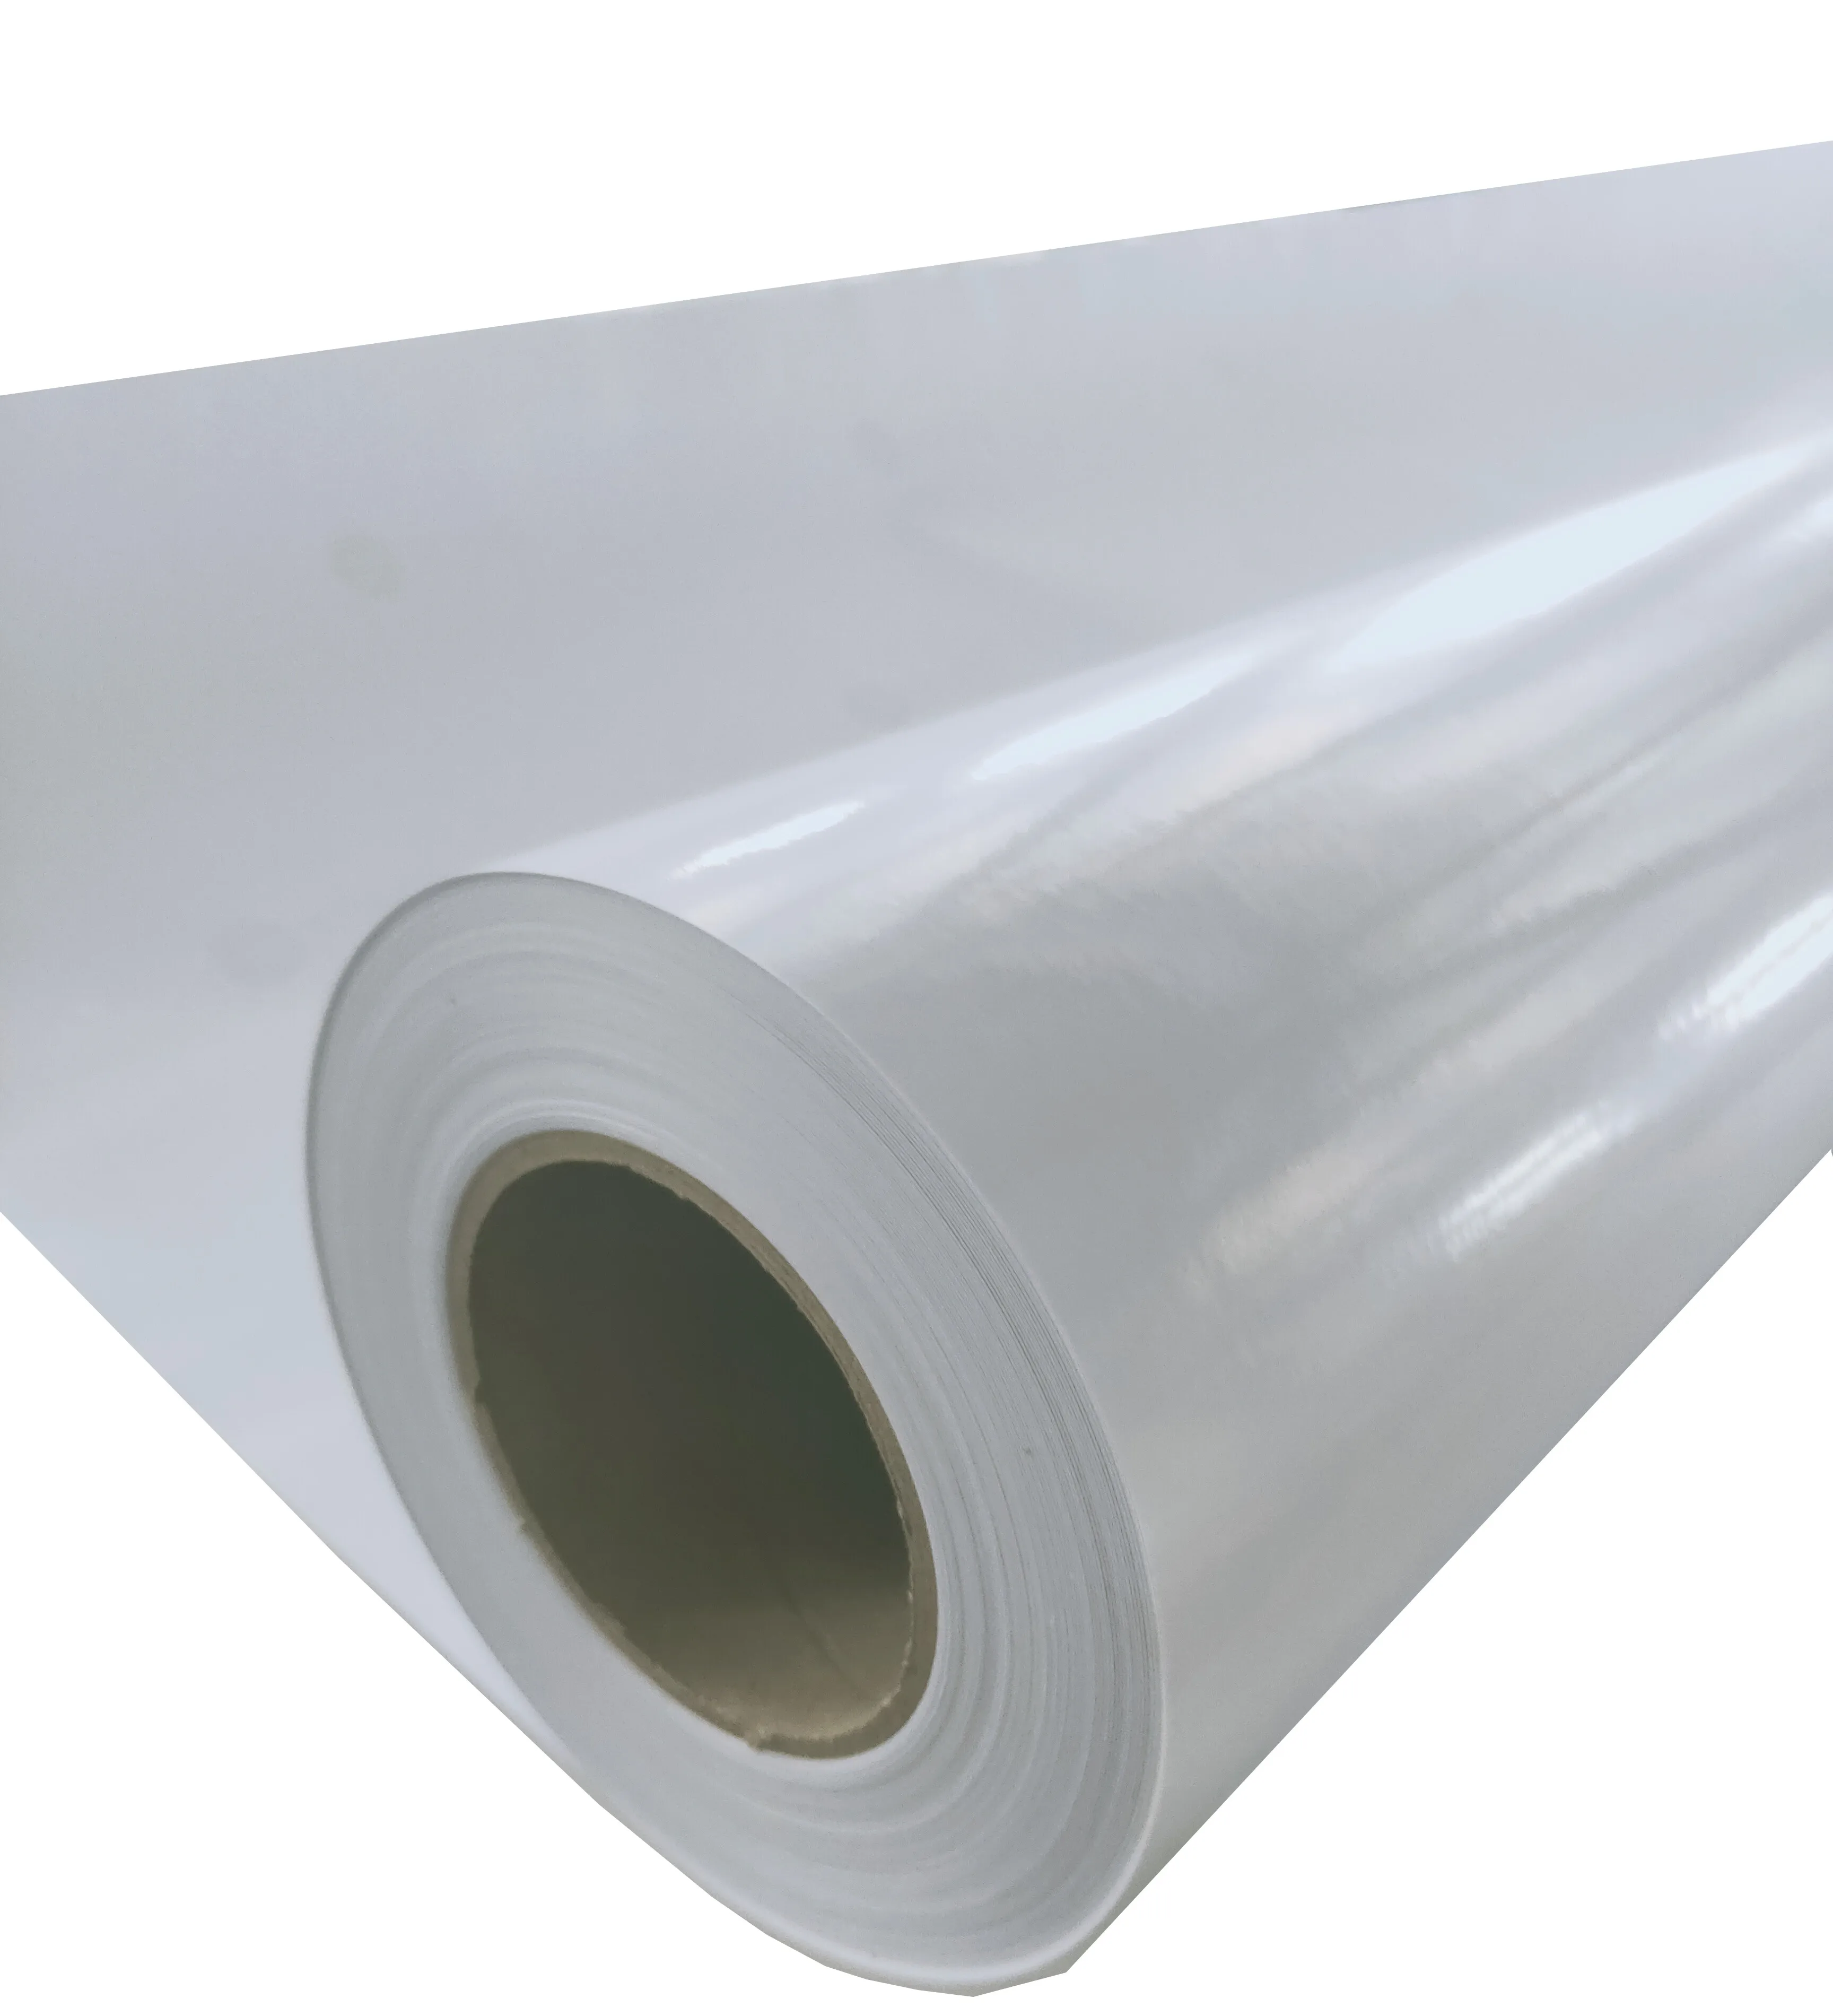 Adhesive Vinyl Roll for Signs